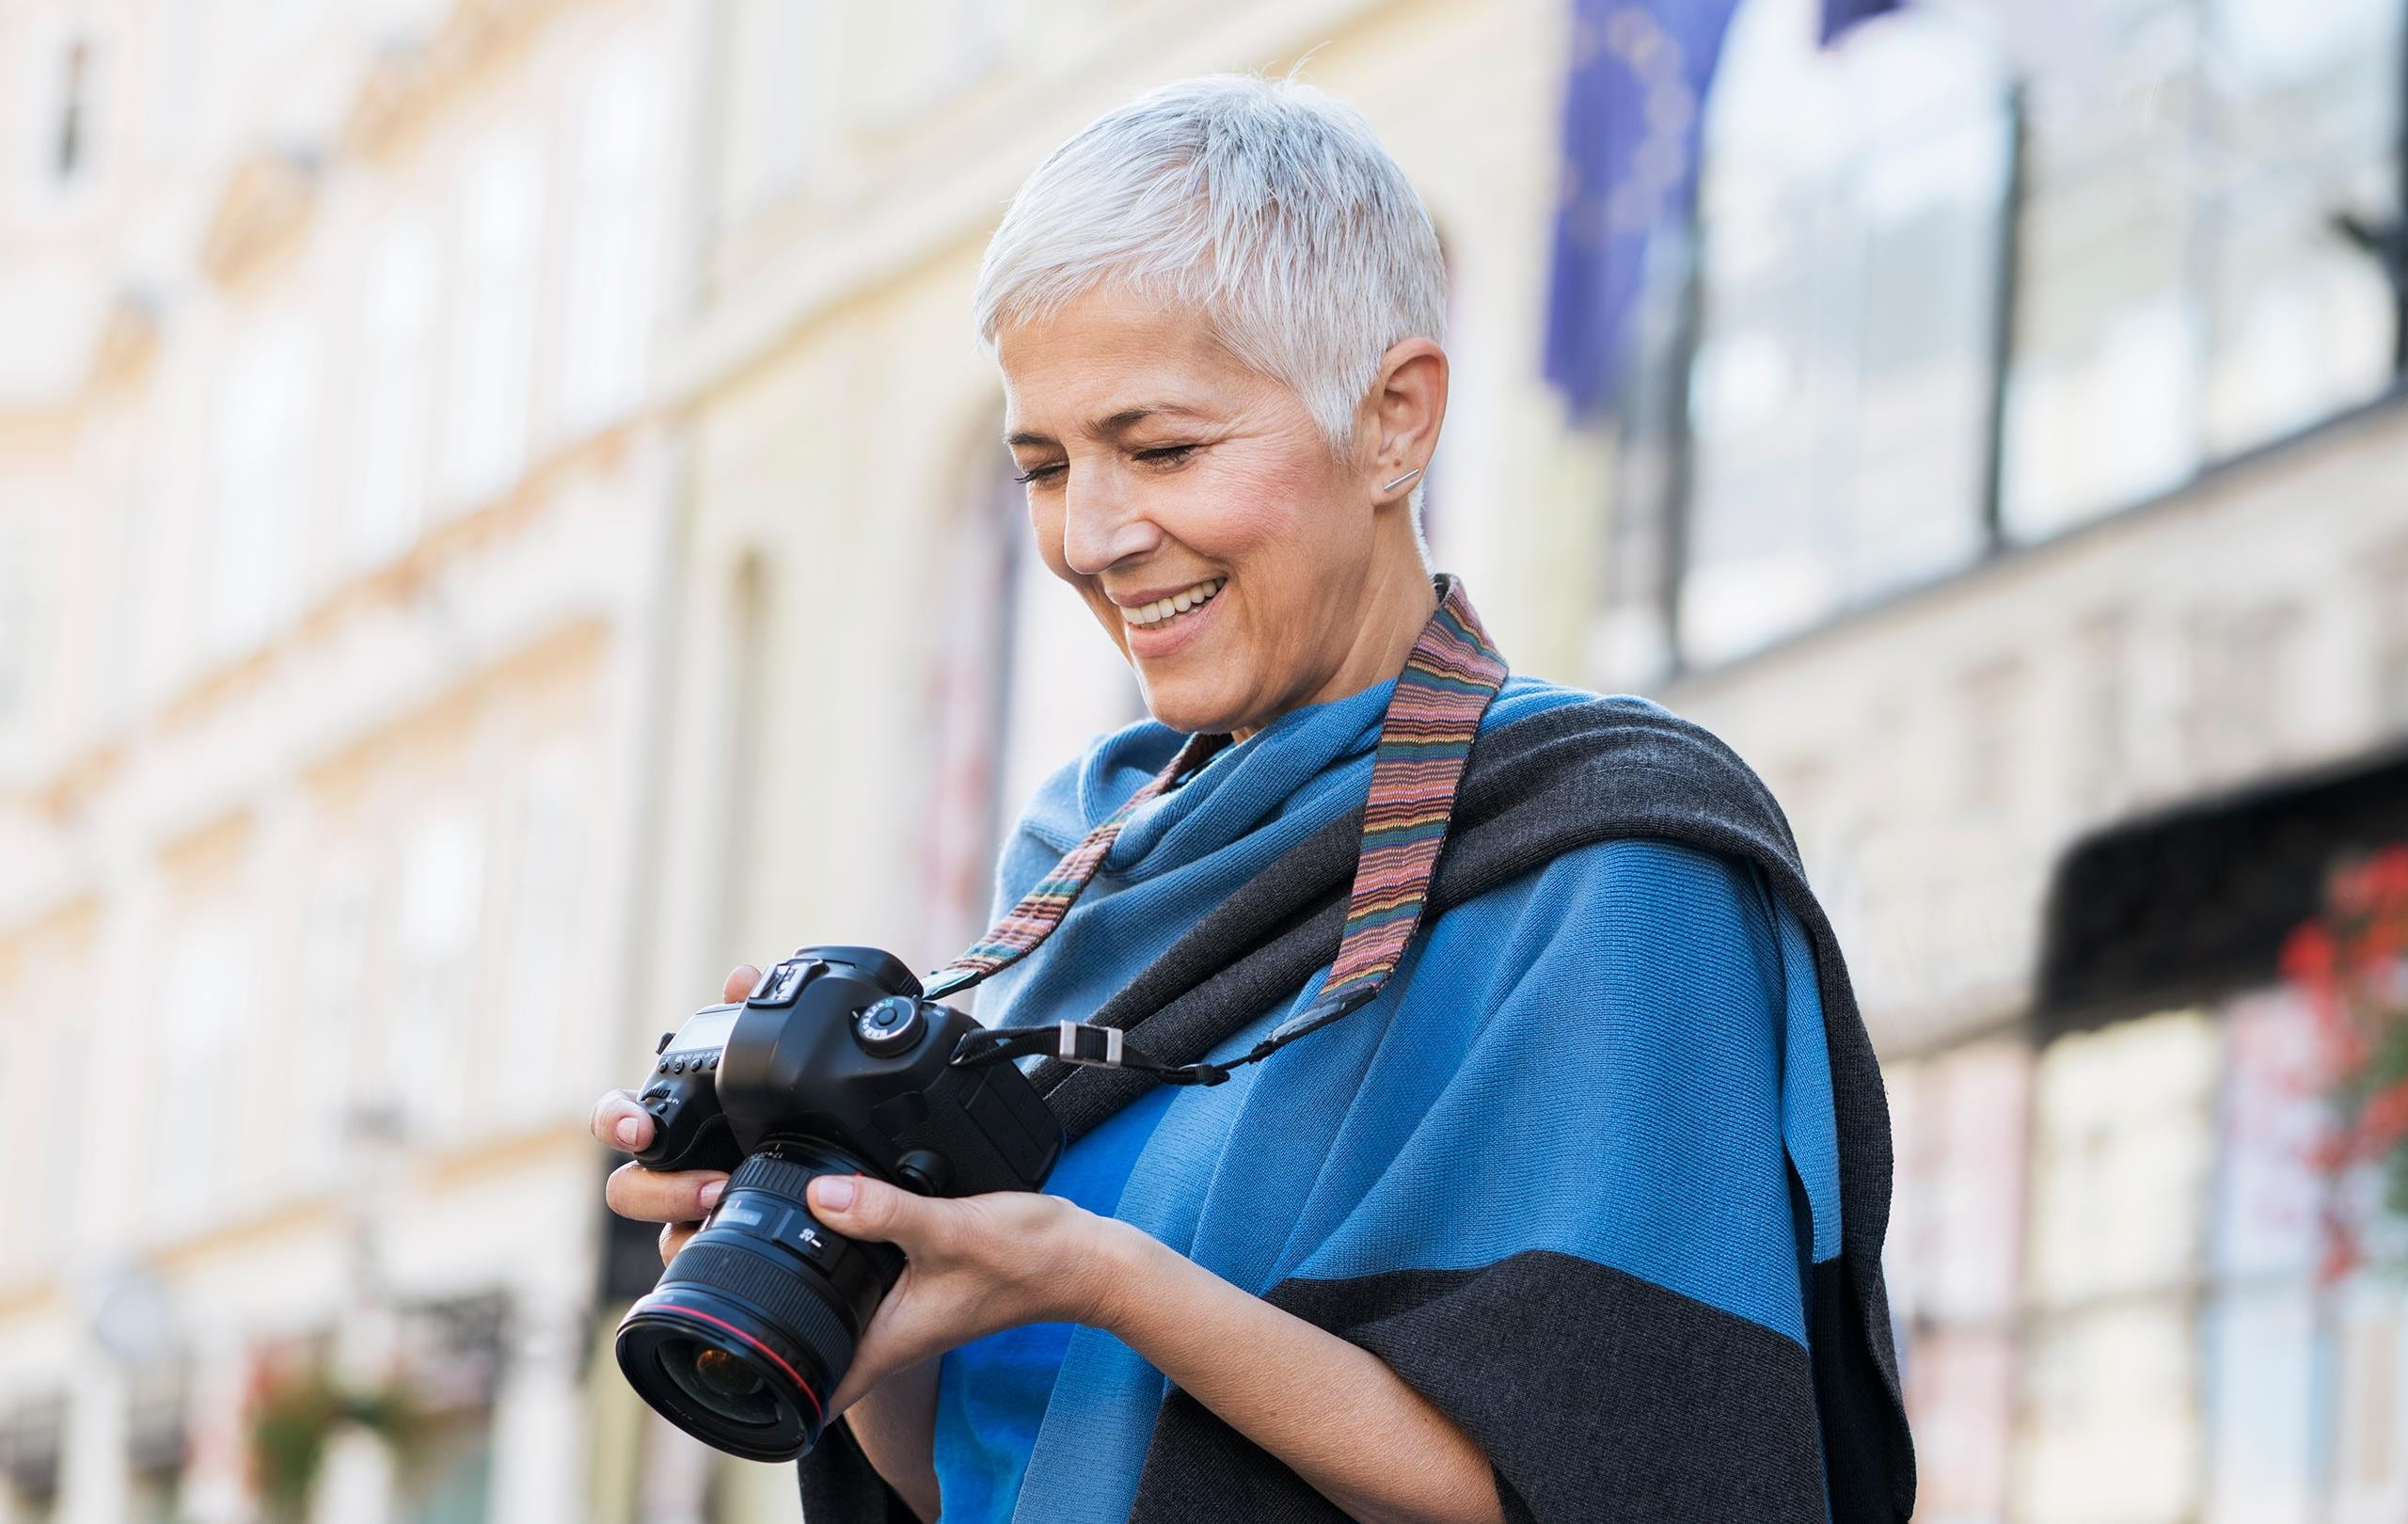 Woman standing in a town smiling at her camera